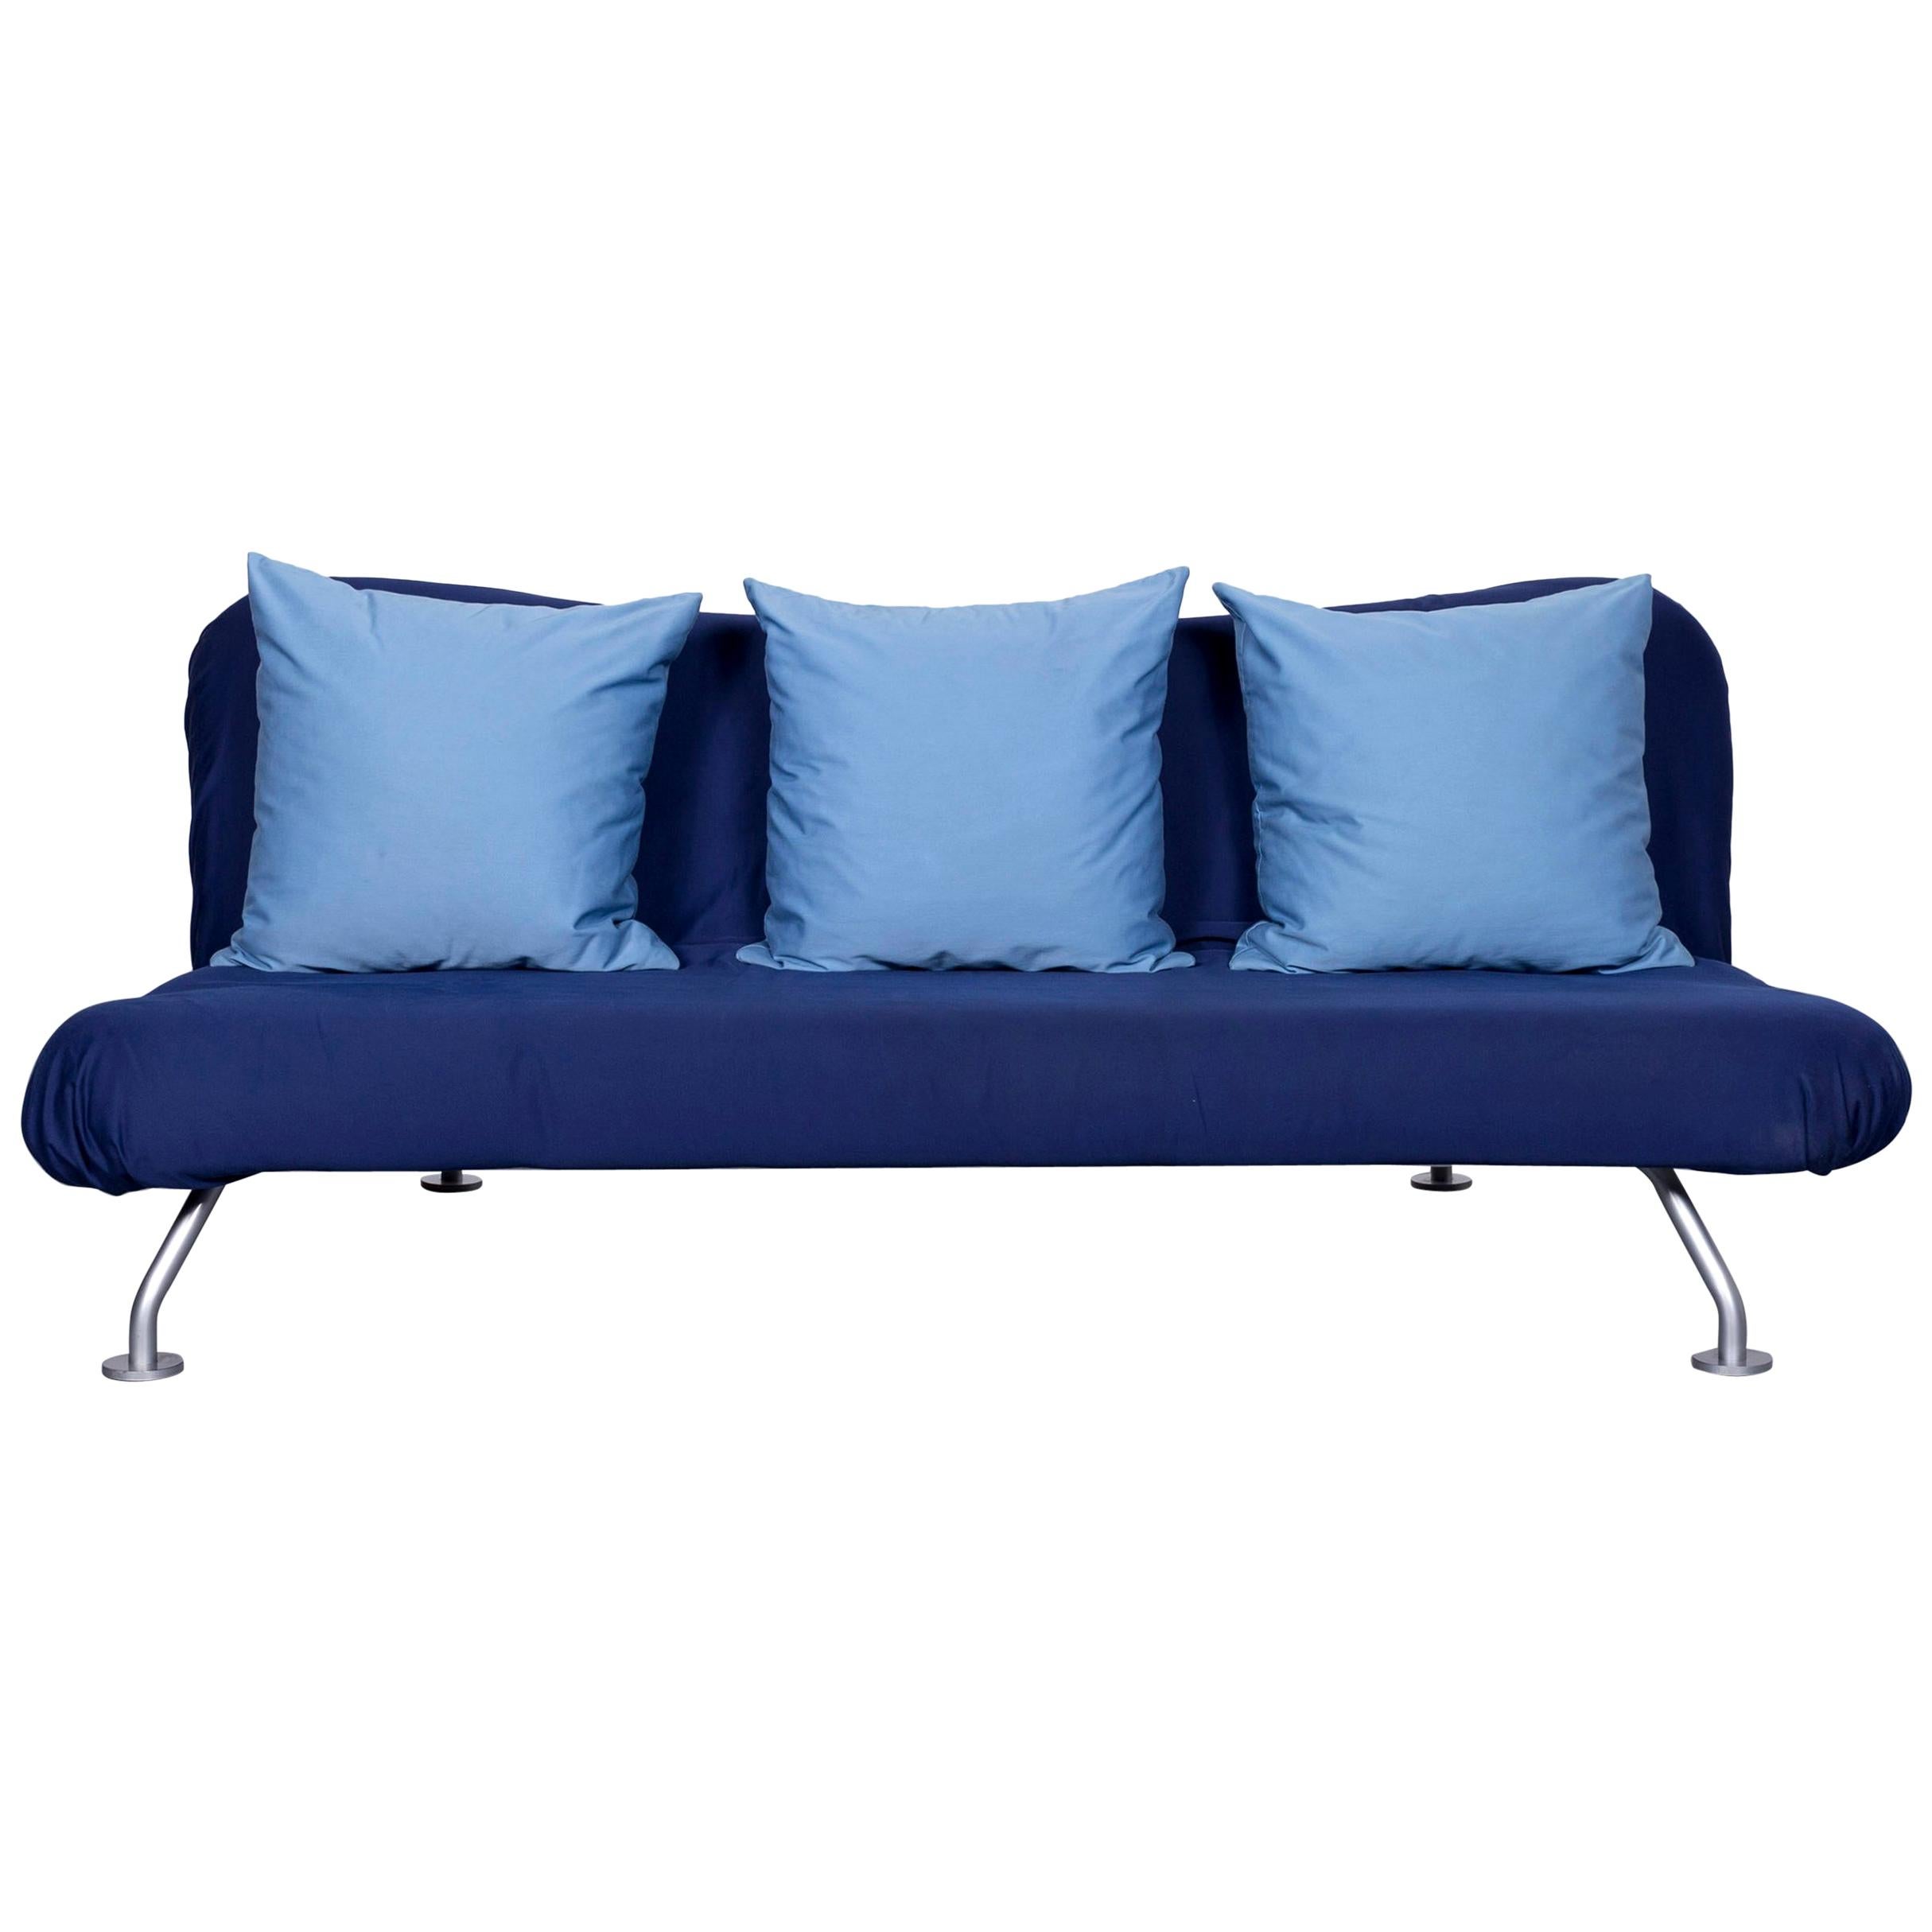 Brühl & Sippold More Designer Fabric Sofa Blue Three-Seat Couch with Function For Sale